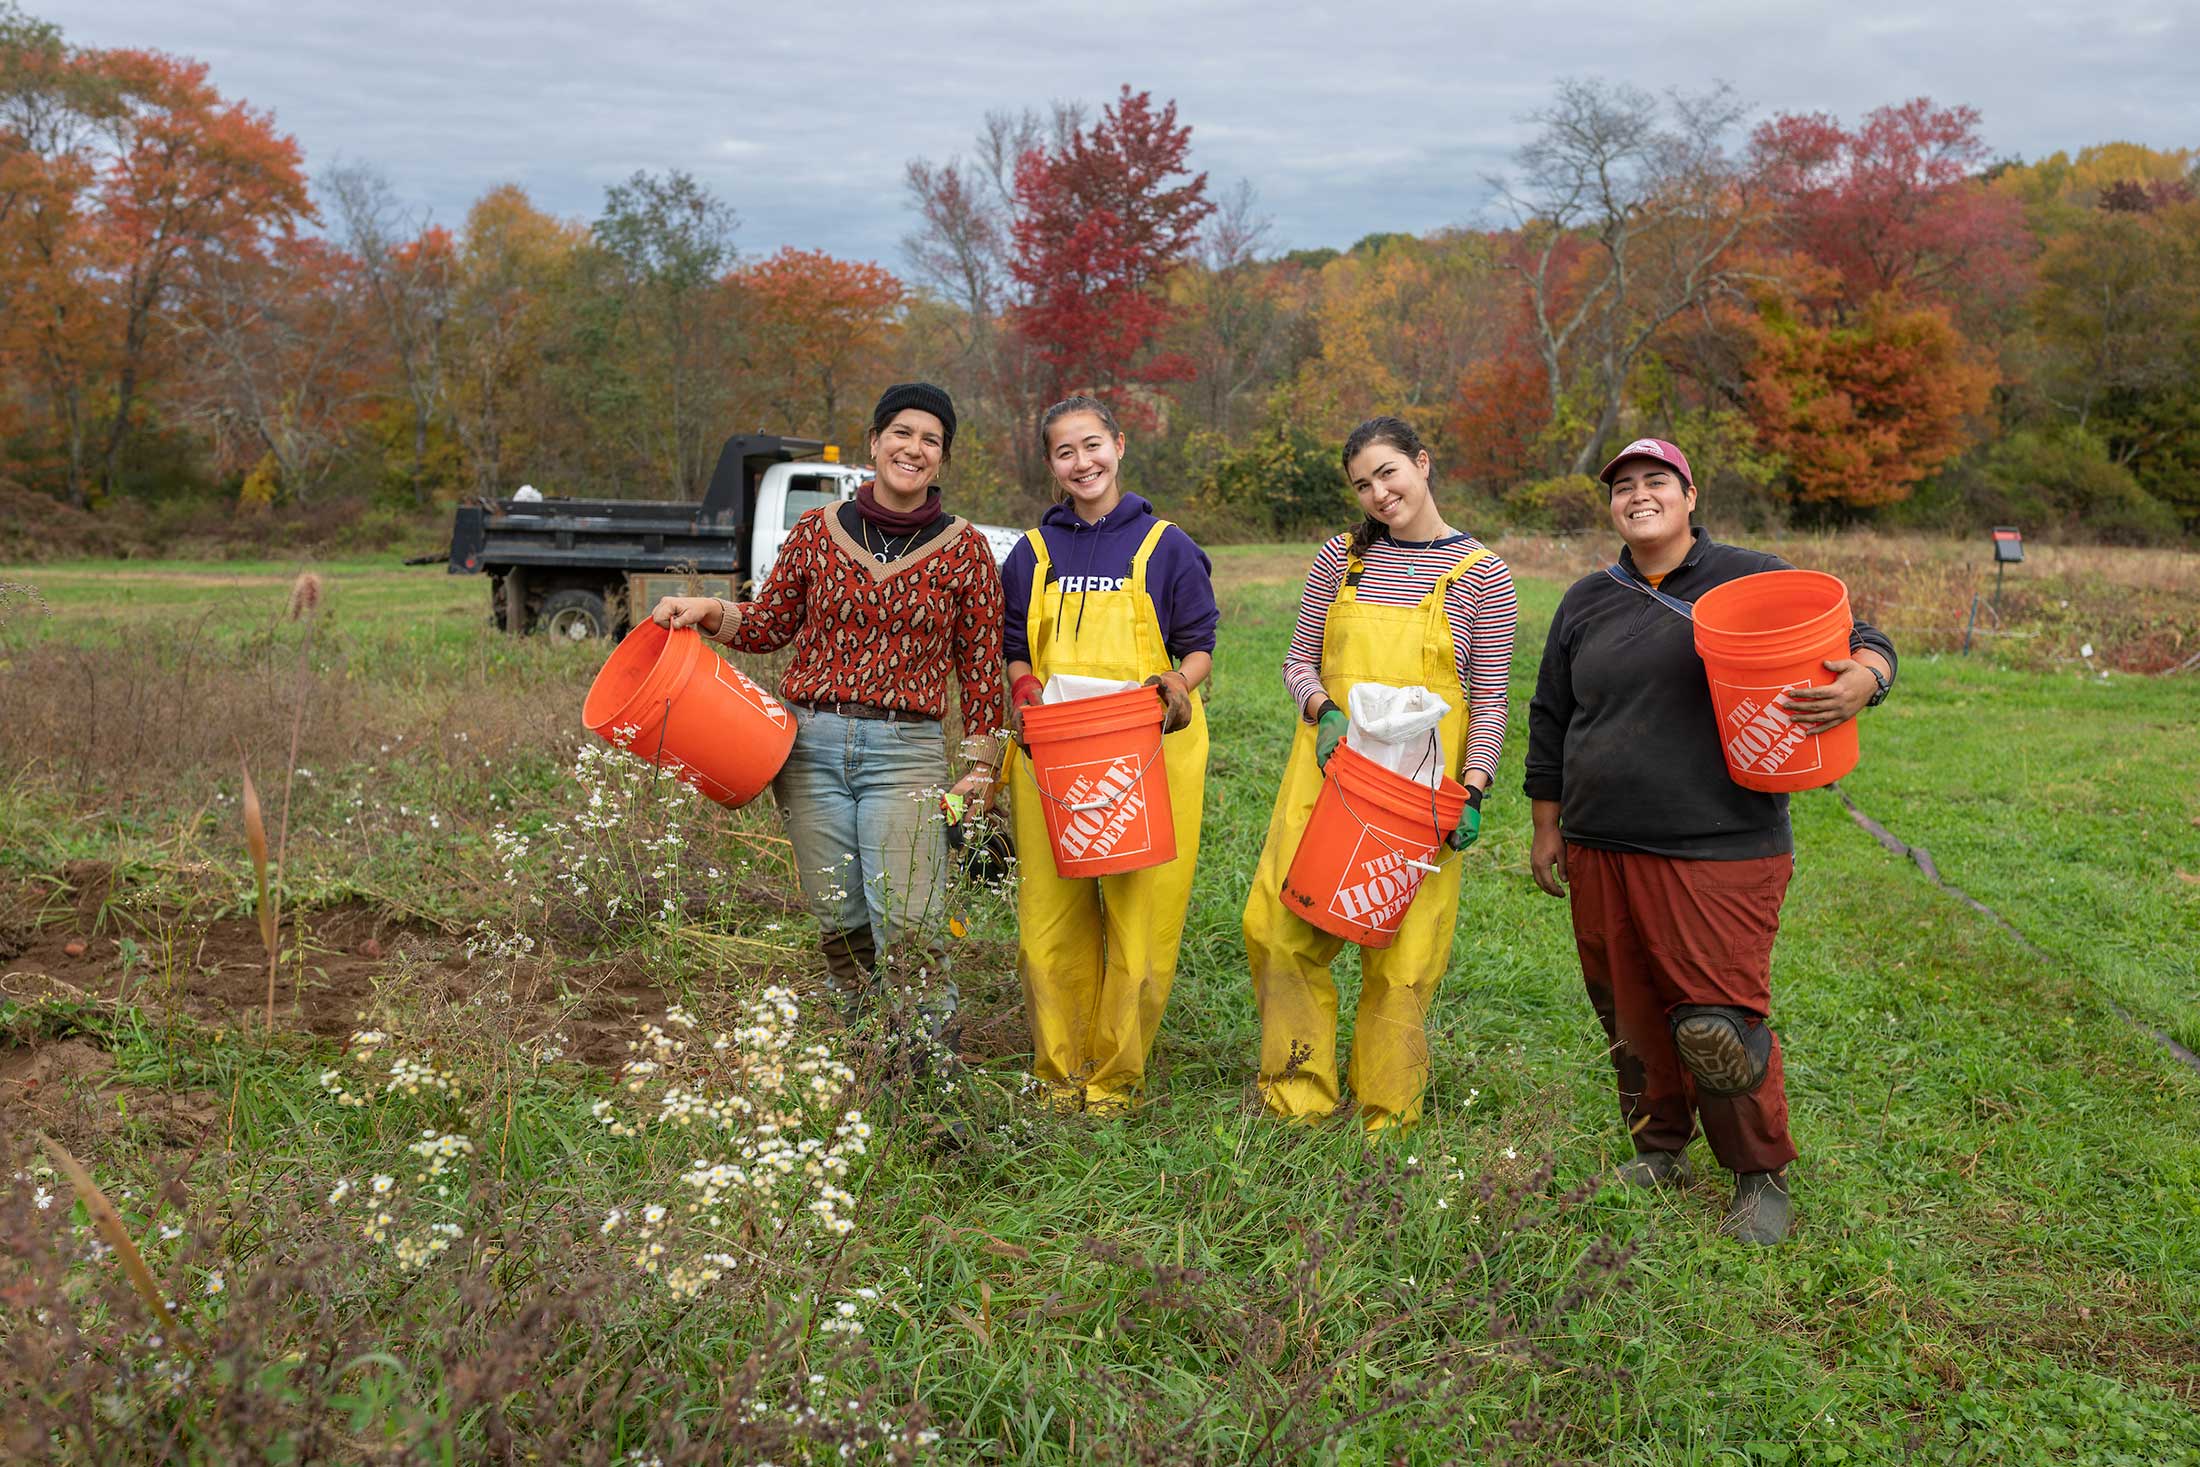 Four women at the Book and Plow Farm pose for a photo by a field.